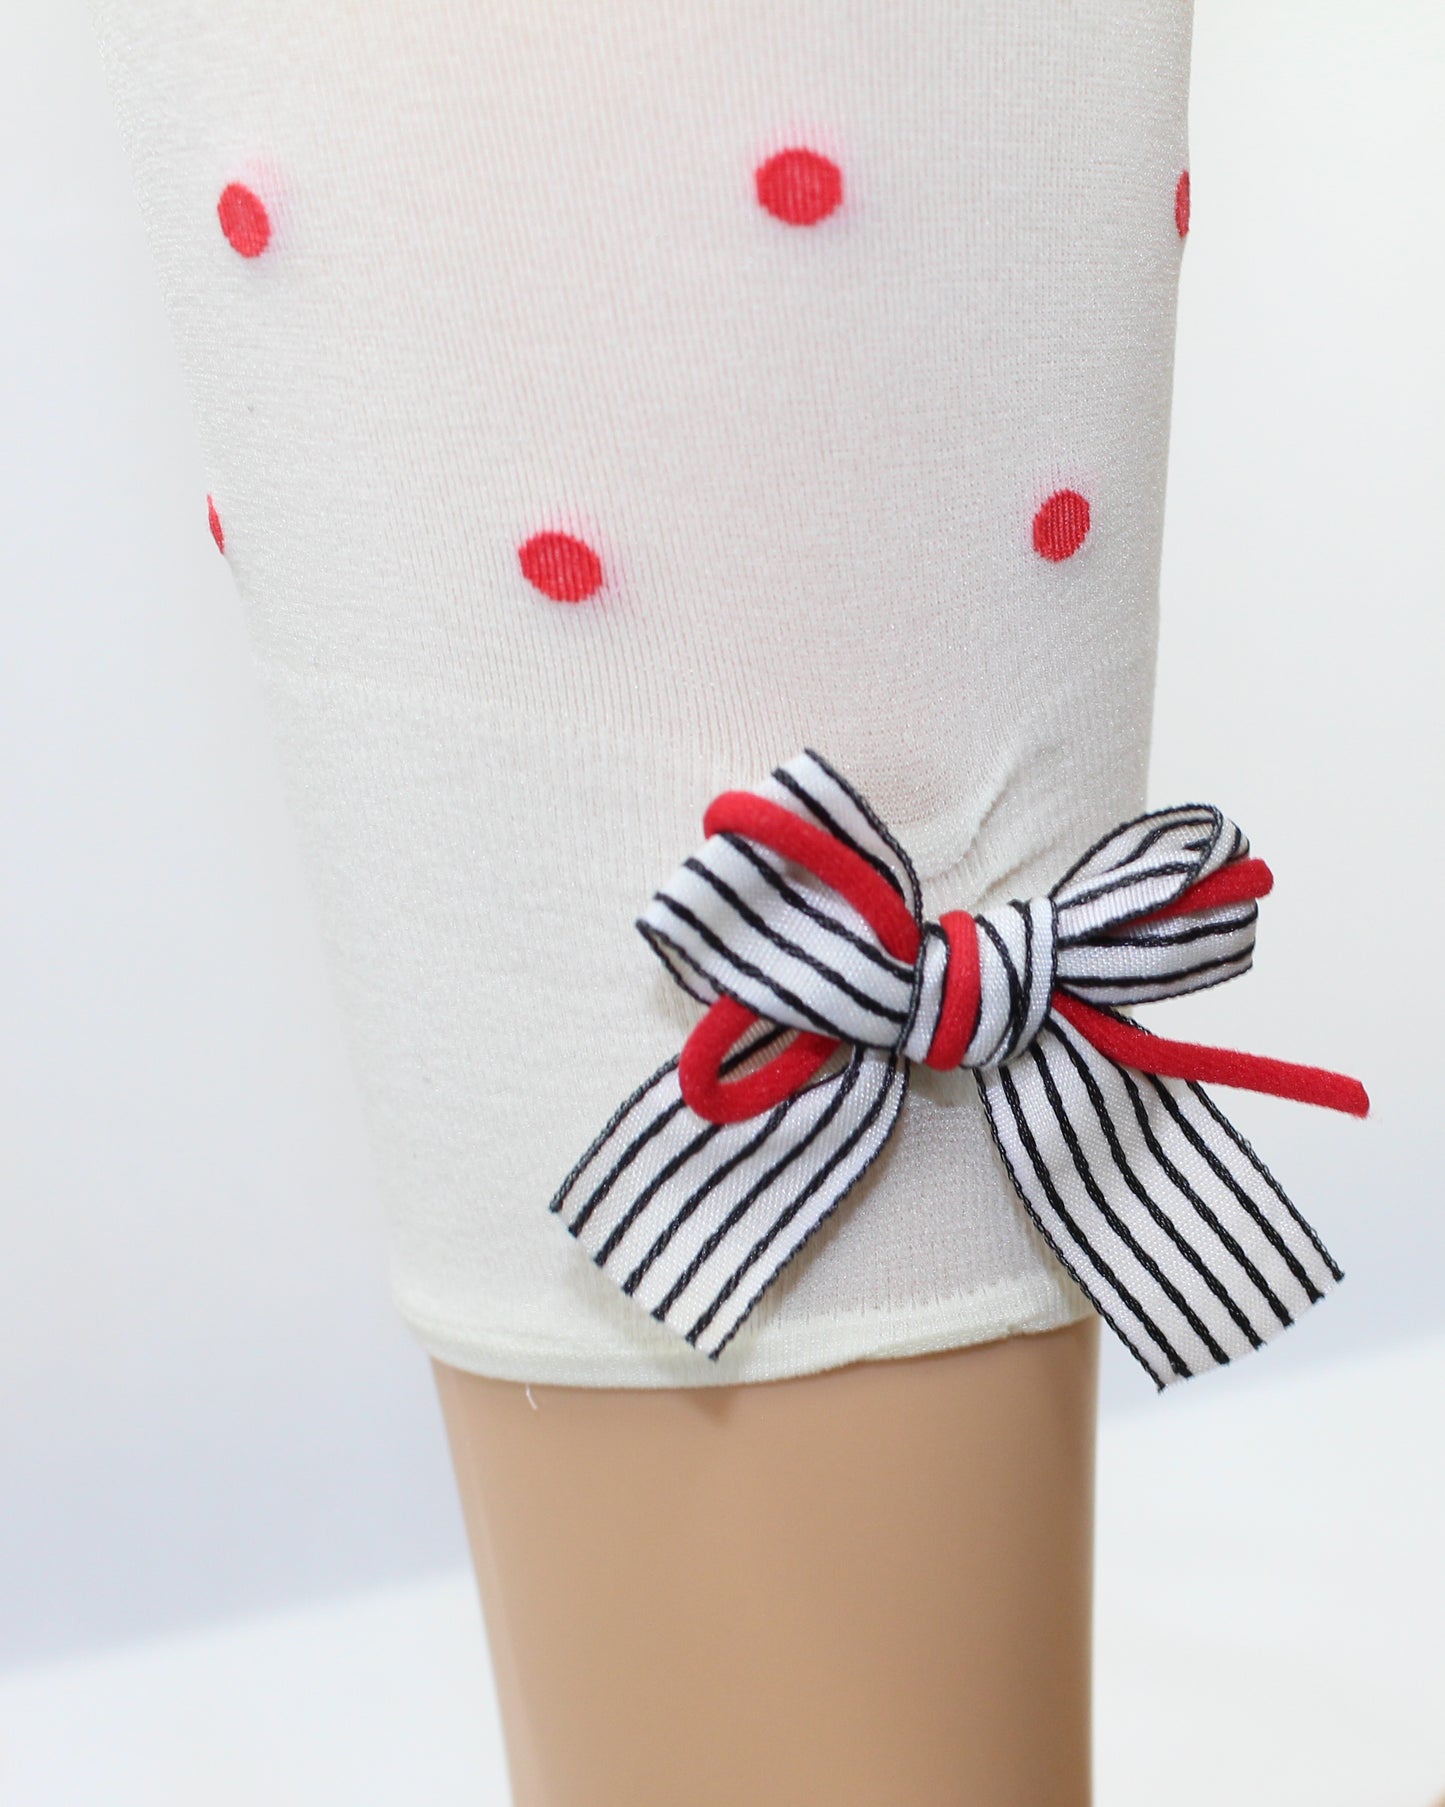 Omsa Papillon Pantacollant - Soft opaque cream kid's footless tights with an all over red polka dot spot pattern and a striped white and black ribbon bow with red twine on the back.